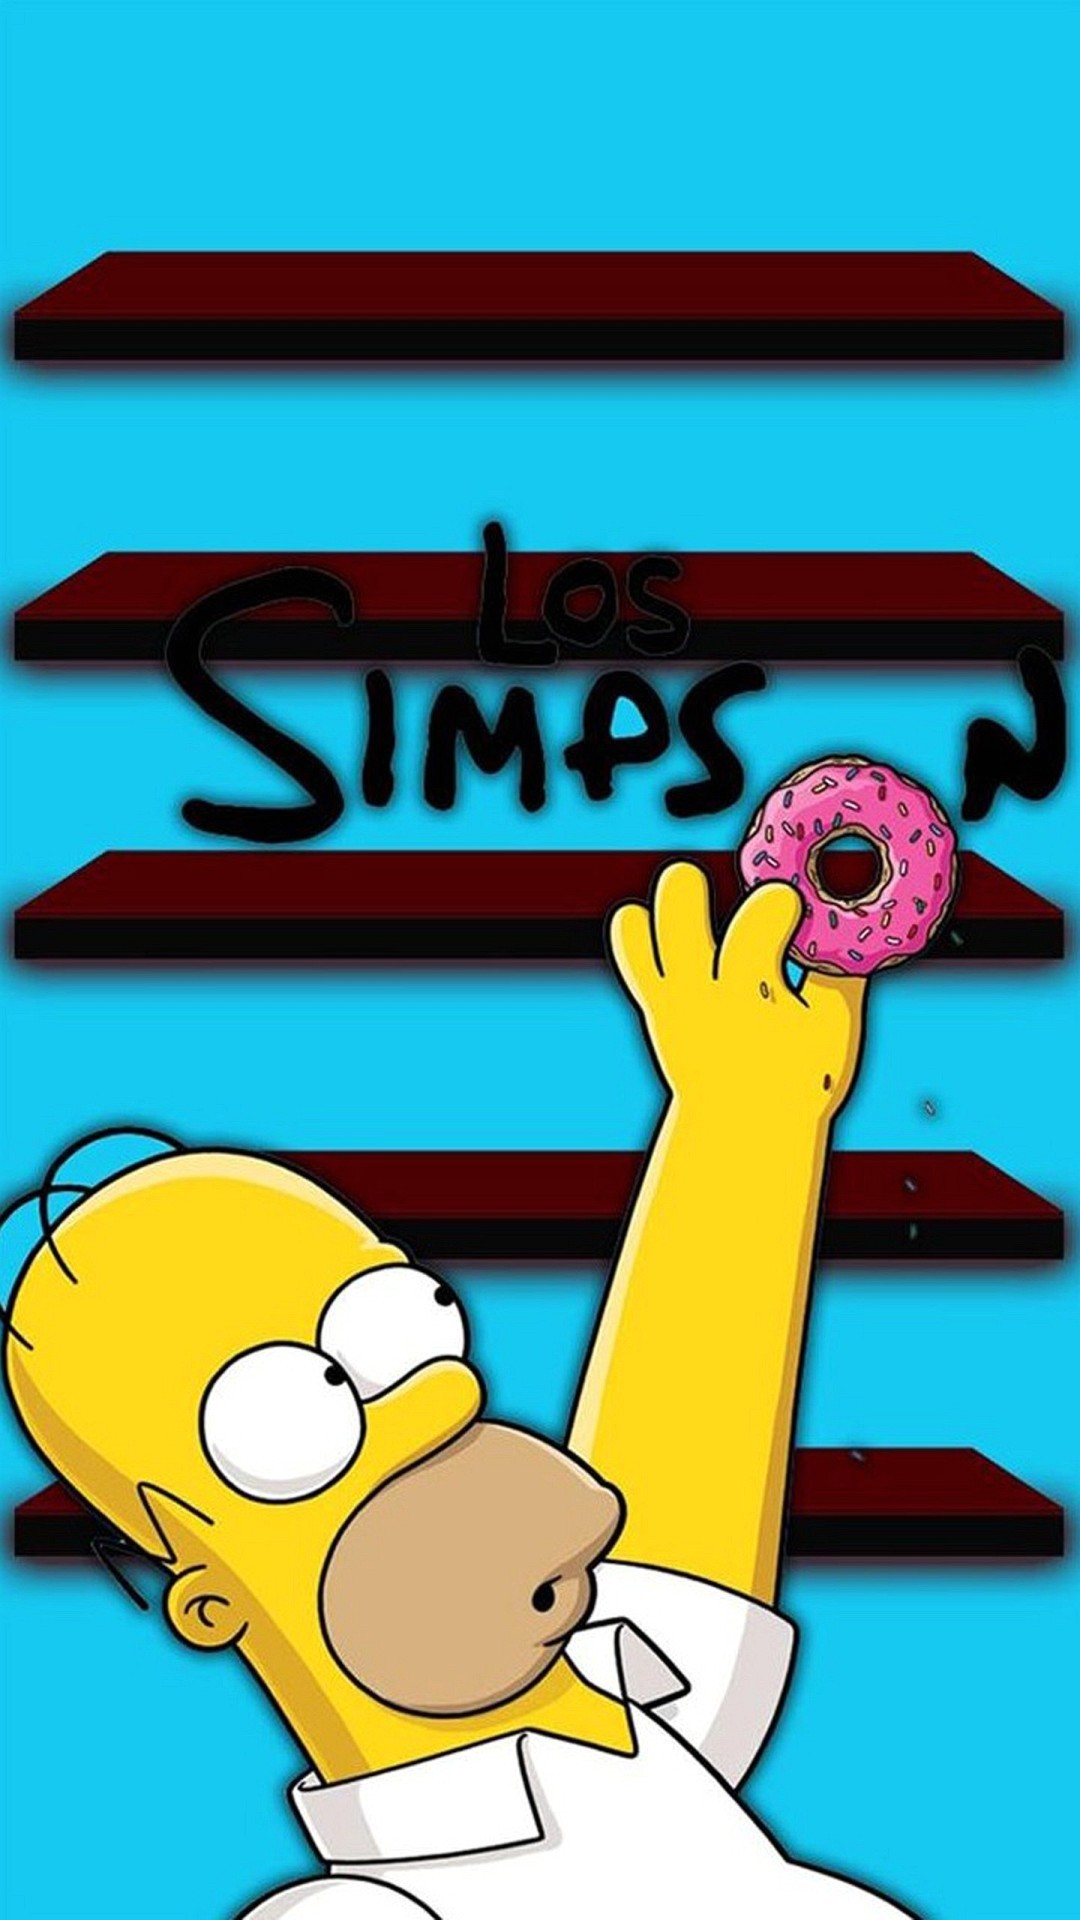 1080x1920 Wallpaper iphone 6 plus homer simpson 5 5 inches